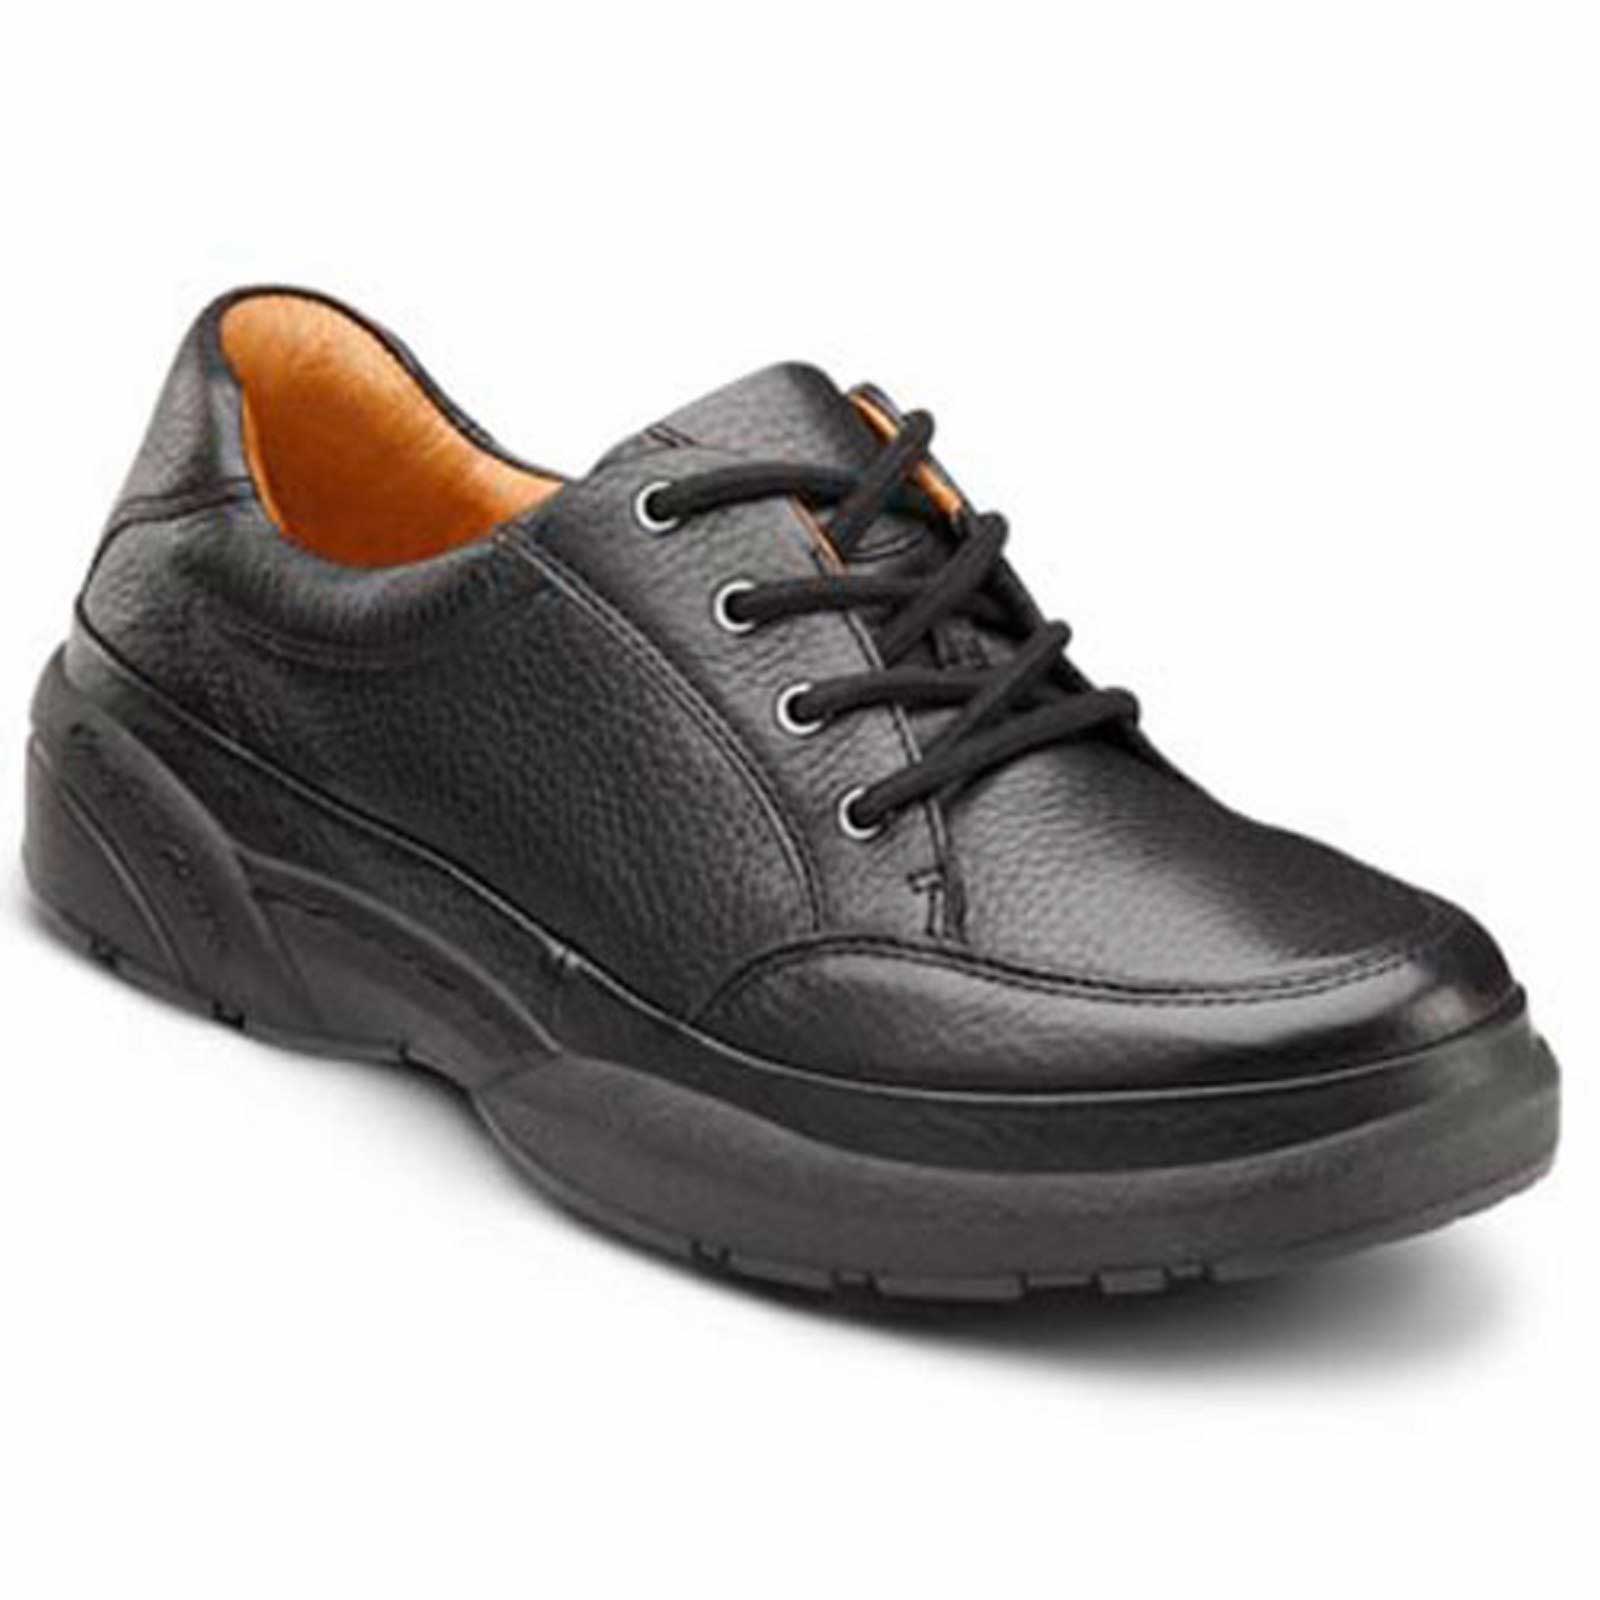 Dr. Comfort Shoes Classic - Men's Comfort Therapeutic Diabetic Shoe with  Gel Plus Inserts - Dress - Medium - Extra Wide - Extra Depth for Orthotics